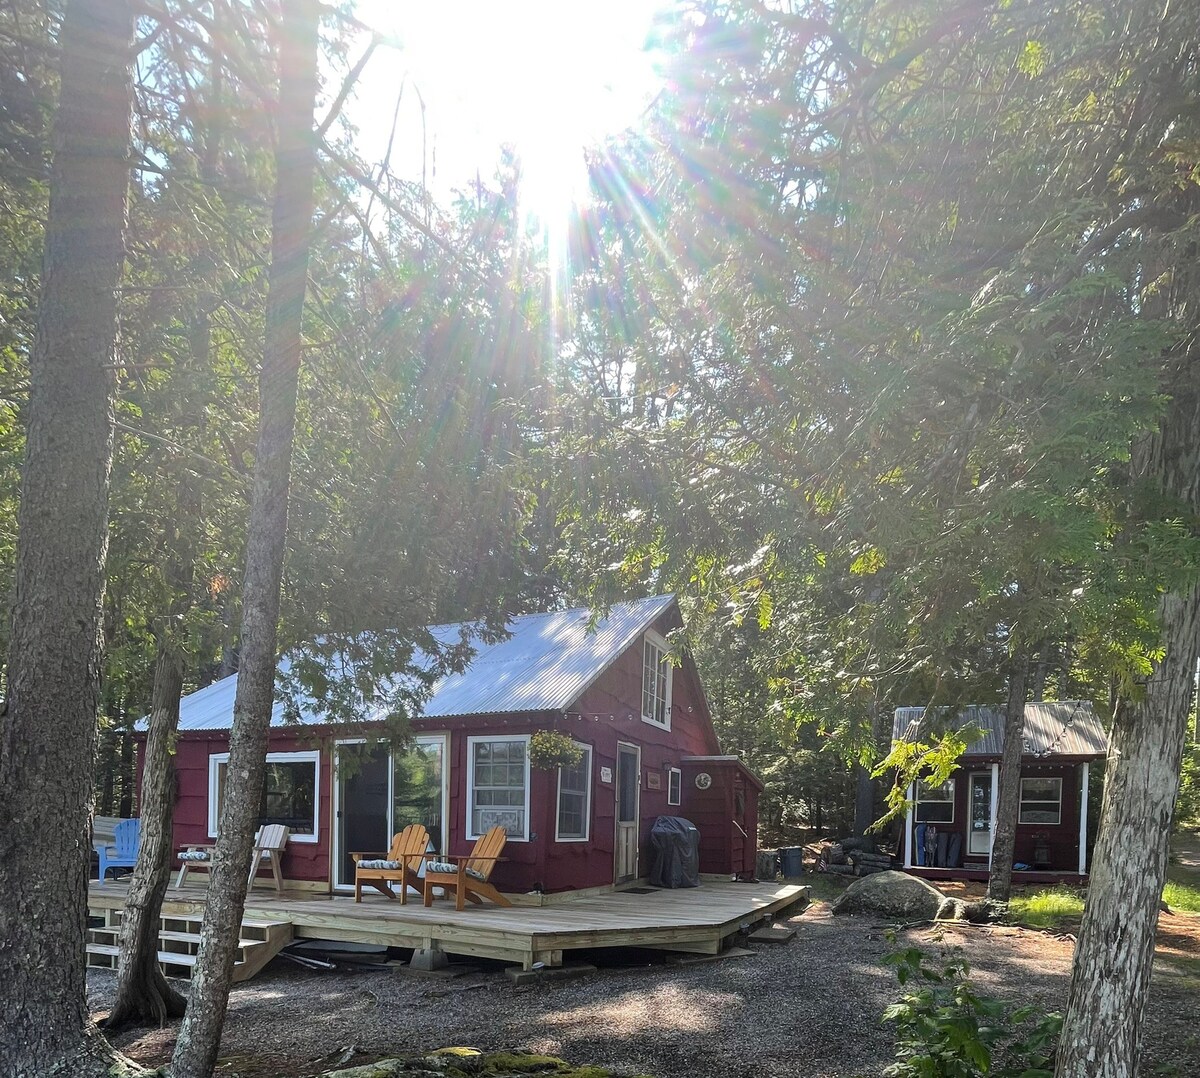 Camp + Bunkhouse - Relax on a quiet pond!